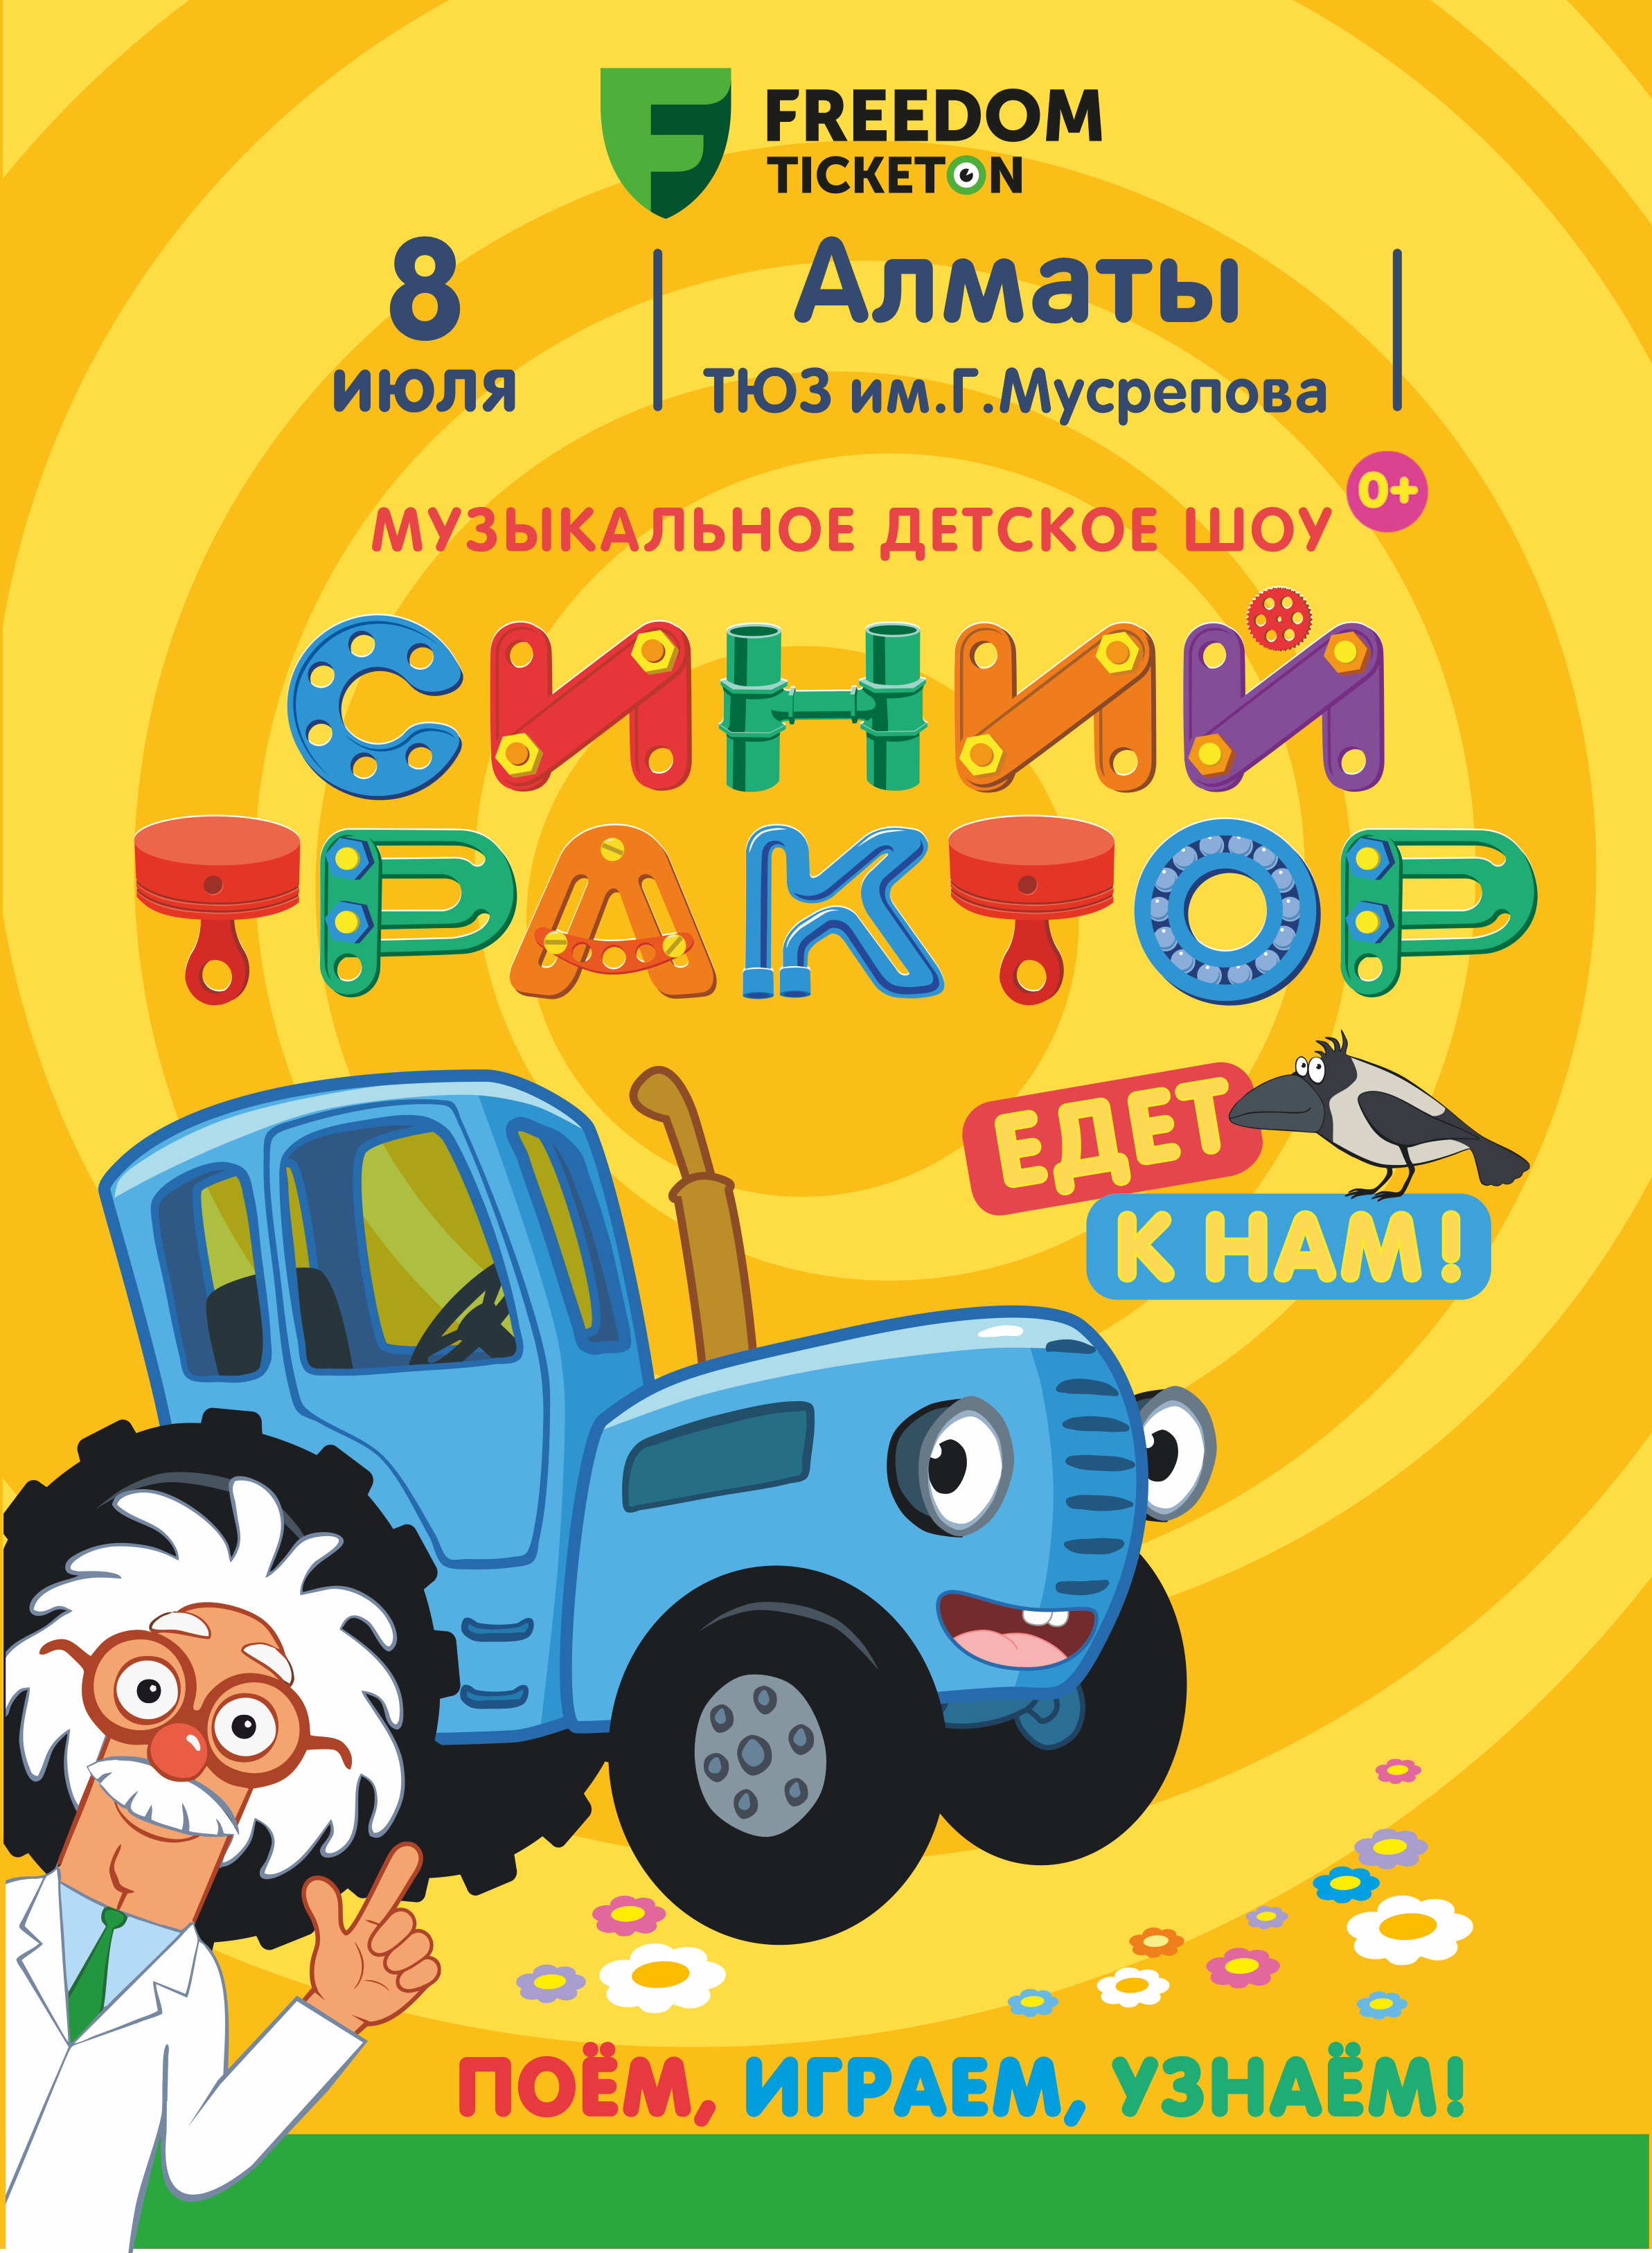 BLUE TRACTOR Show in Almaty